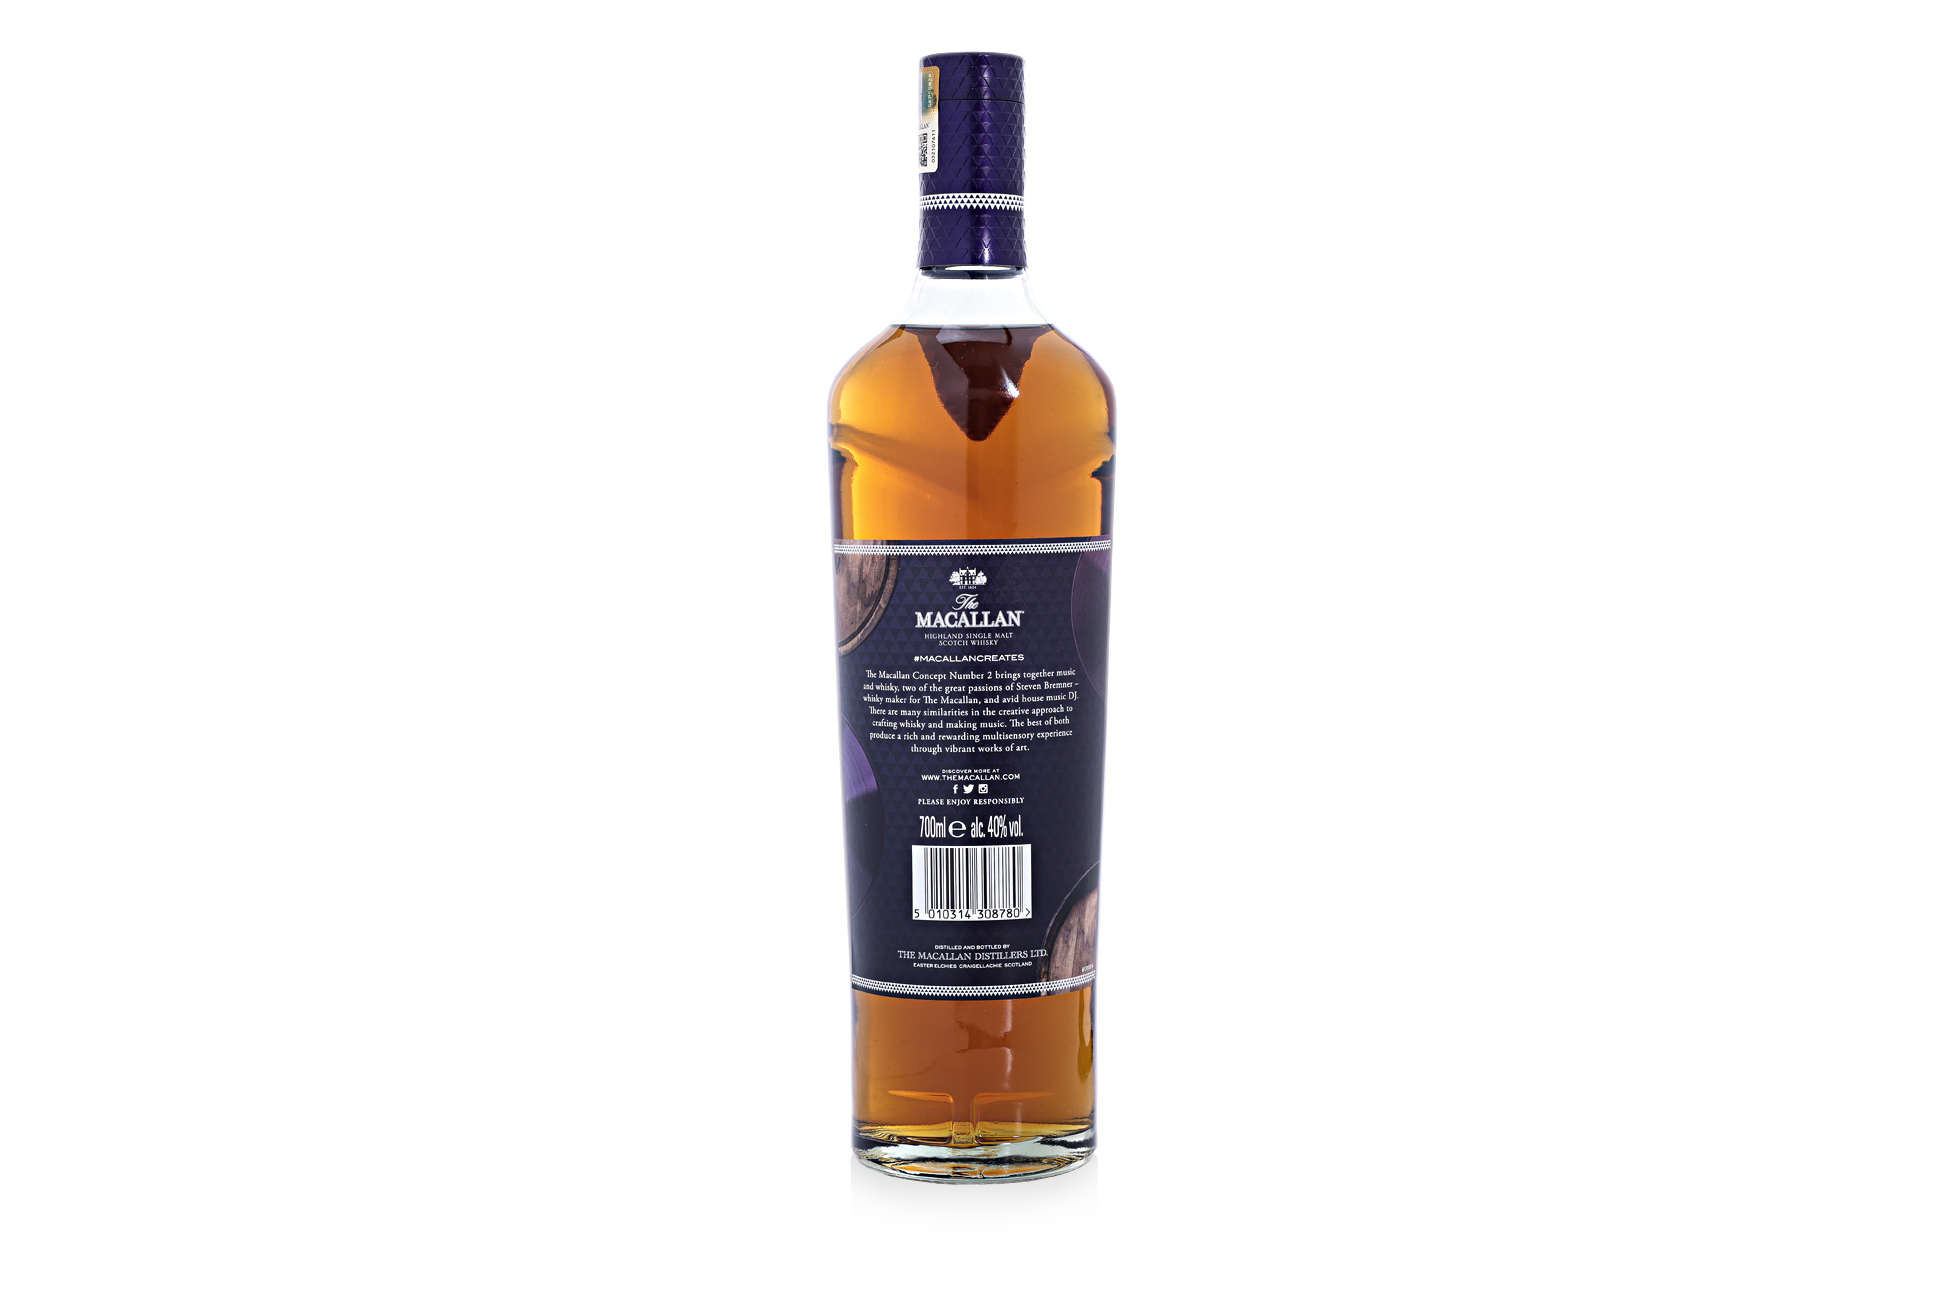 THE MACALLAN 'CONCEPT NUMBER 2' SINGLE MALT SCOTCH WHISKY - Image 3 of 3